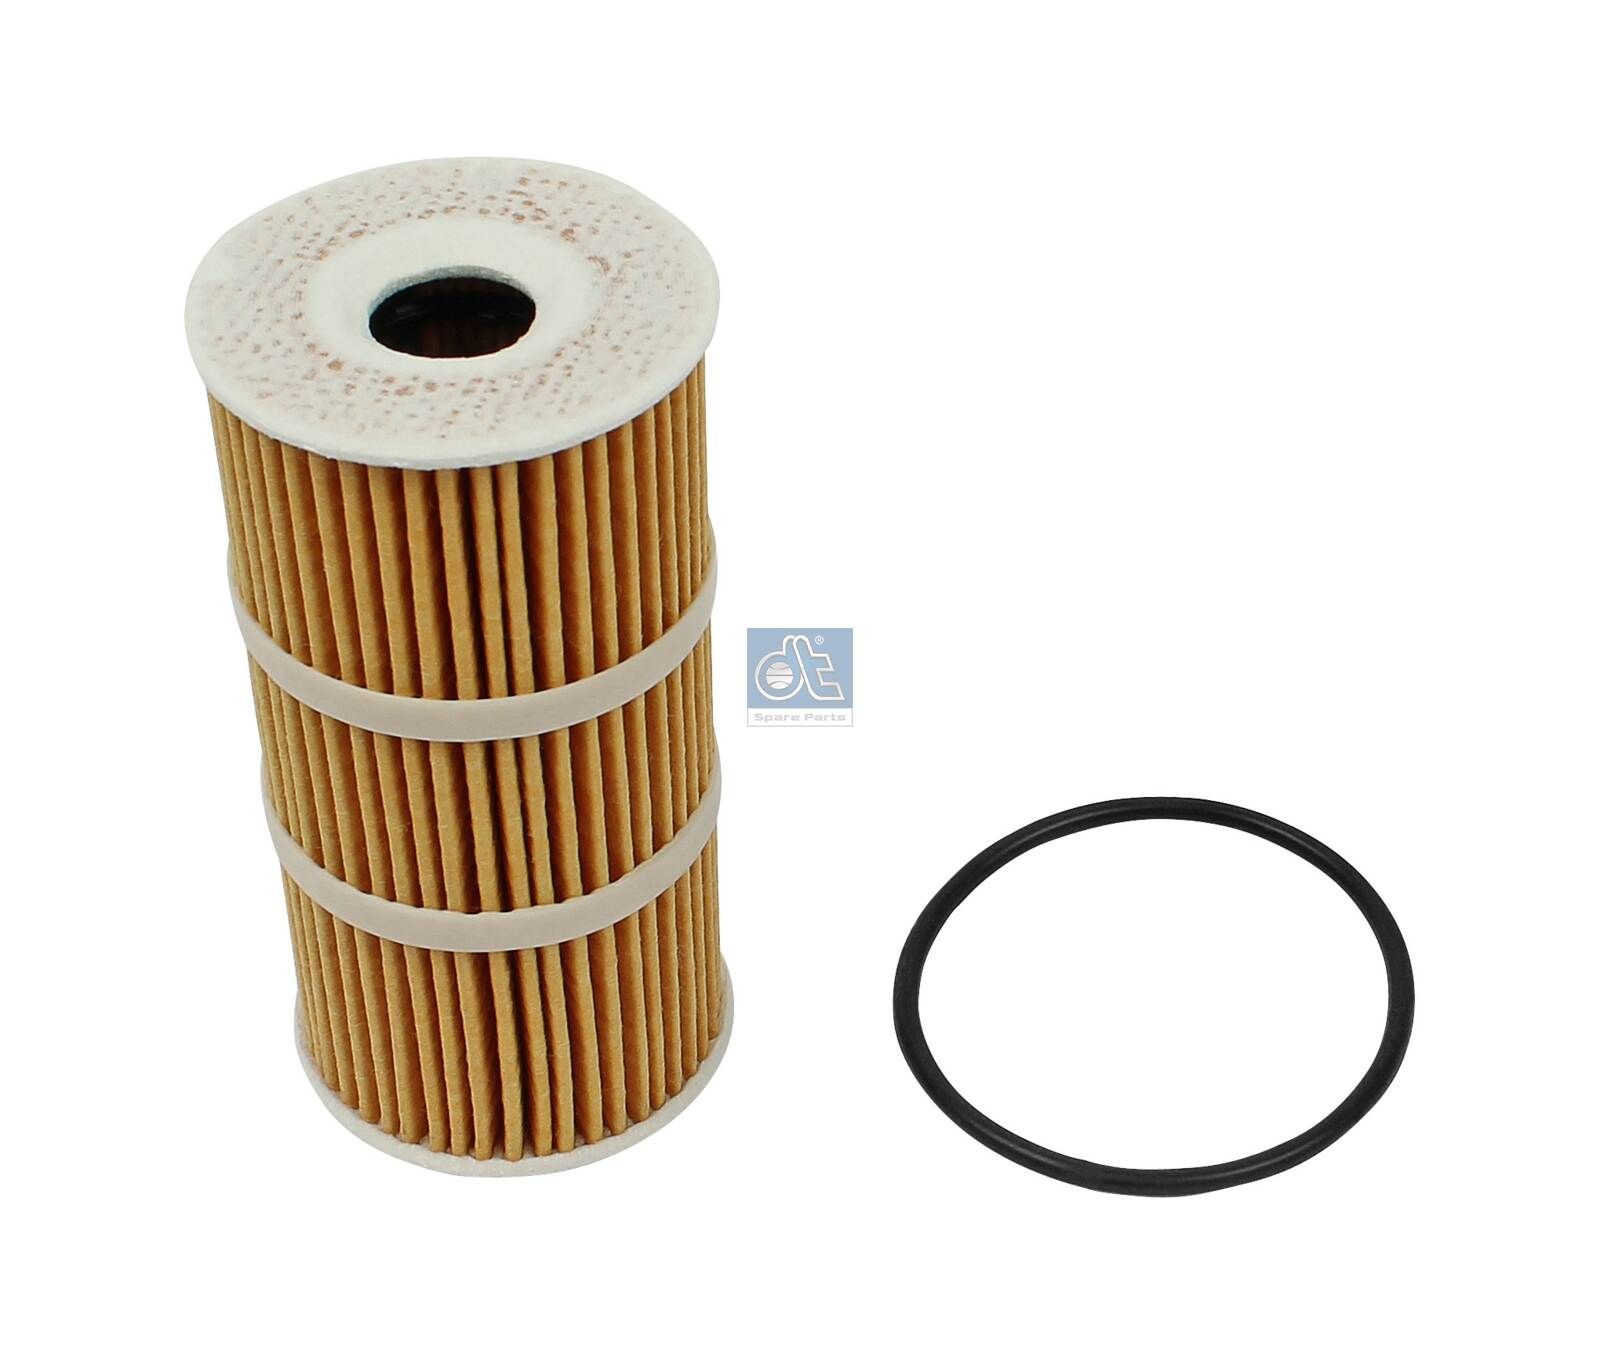 Renault TRAFIC Oil filters 9975420 DT Spare Parts 6.24223 online buy